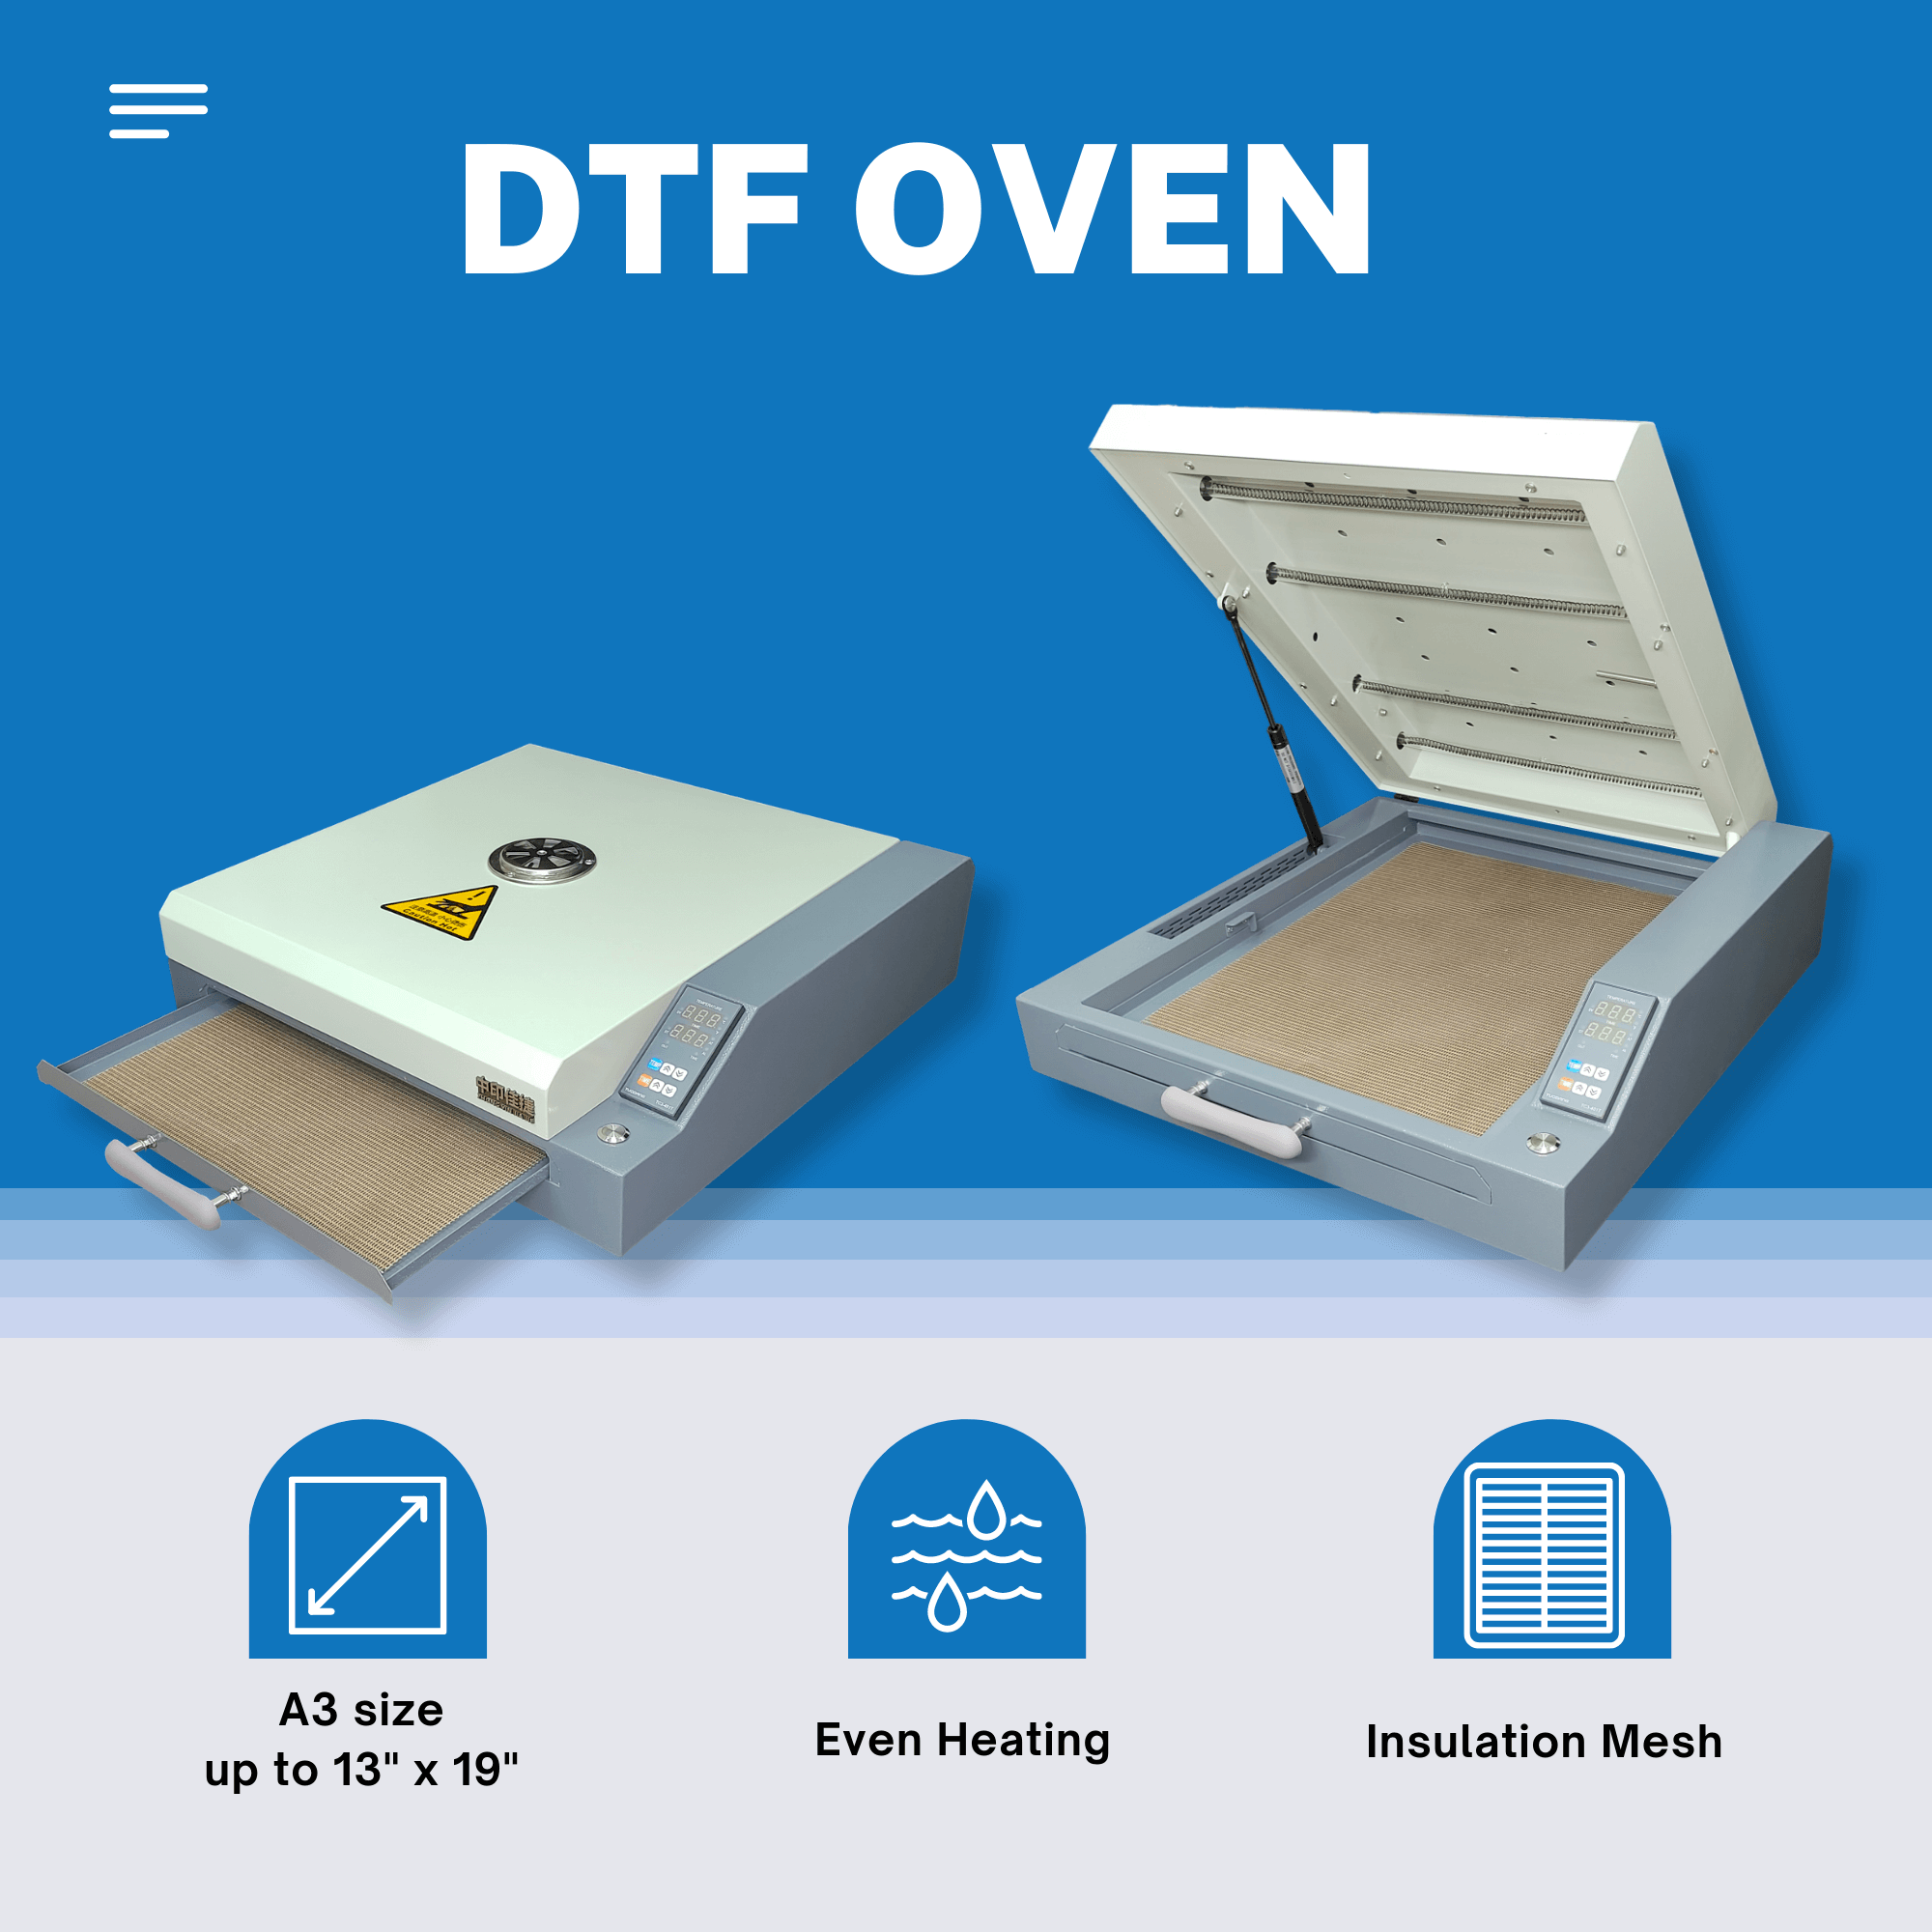 Oven for DTF Printing, DTF Curing Oven, 24 Direct To Film Curing Oven